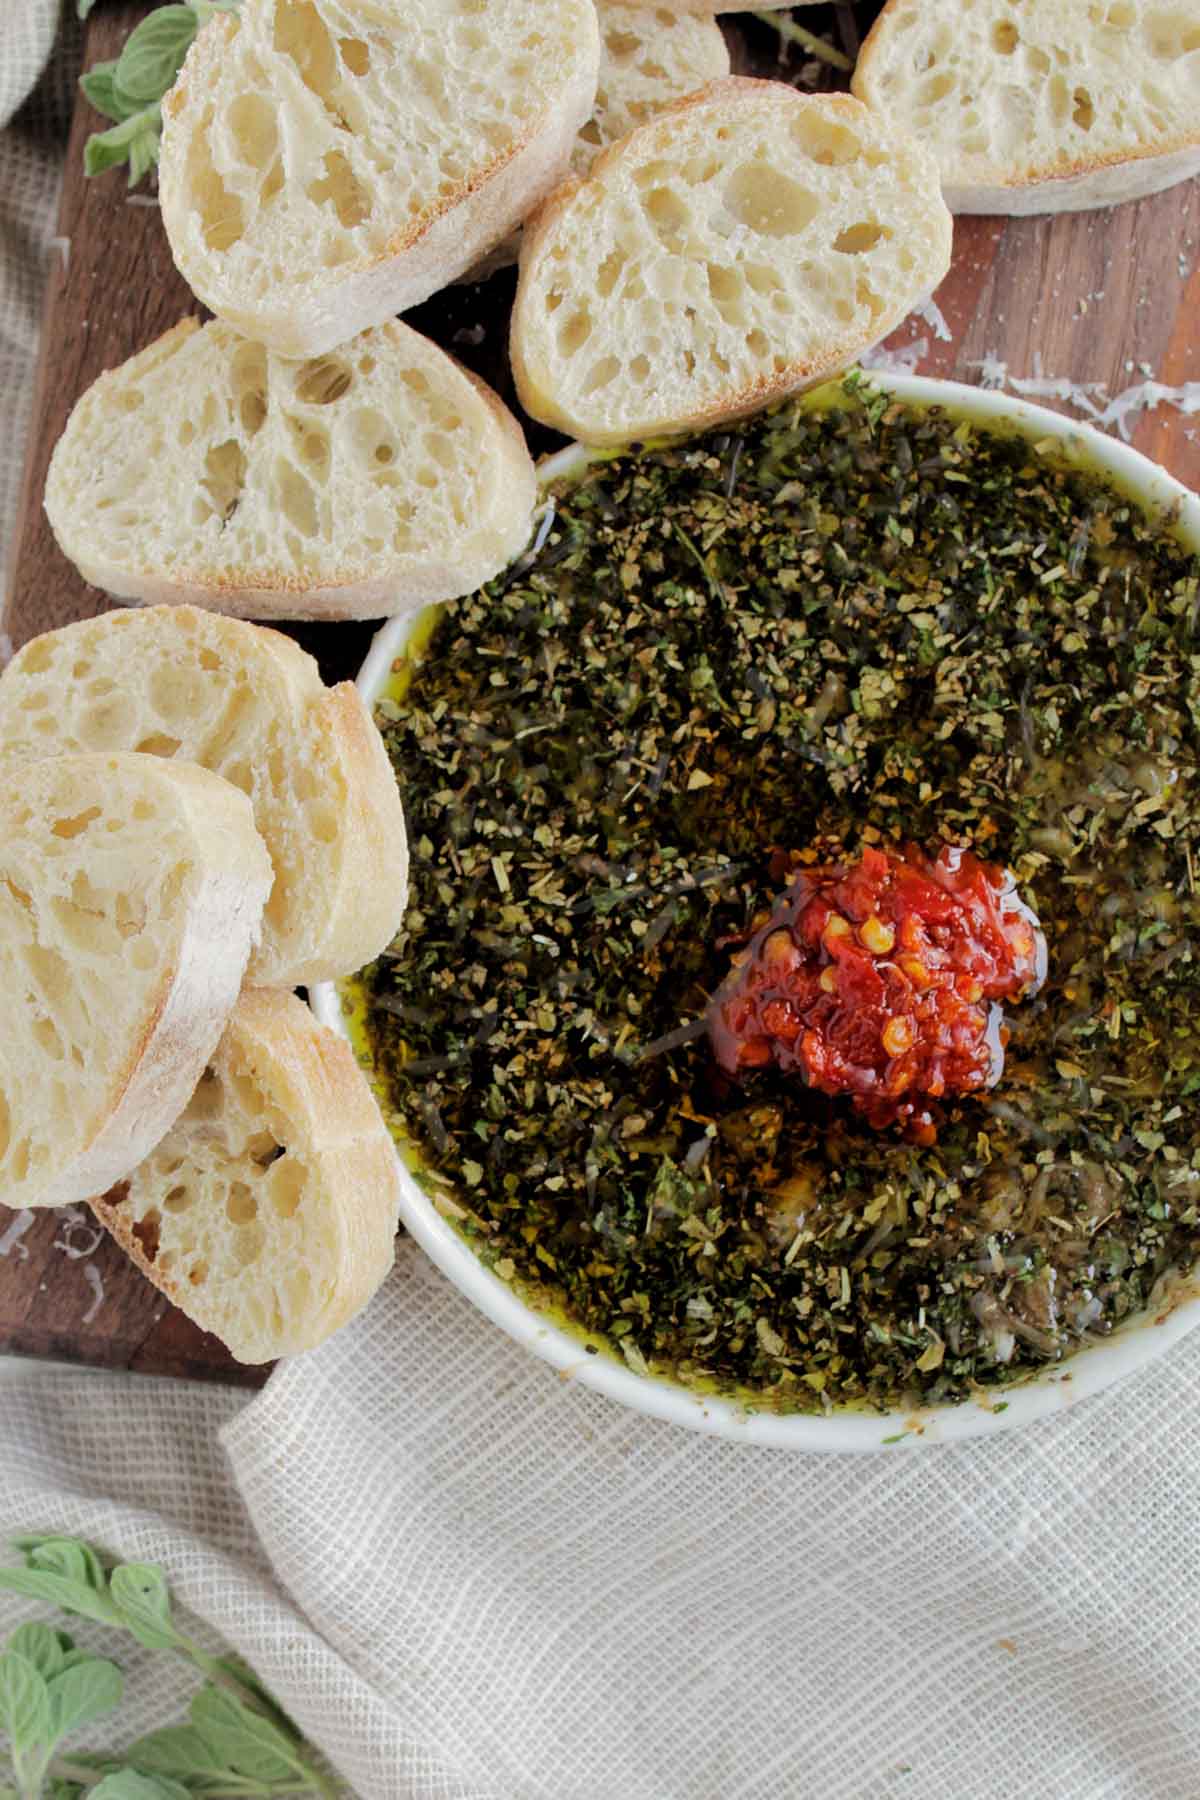 herbed olive oil dip with calabrian chili paste.